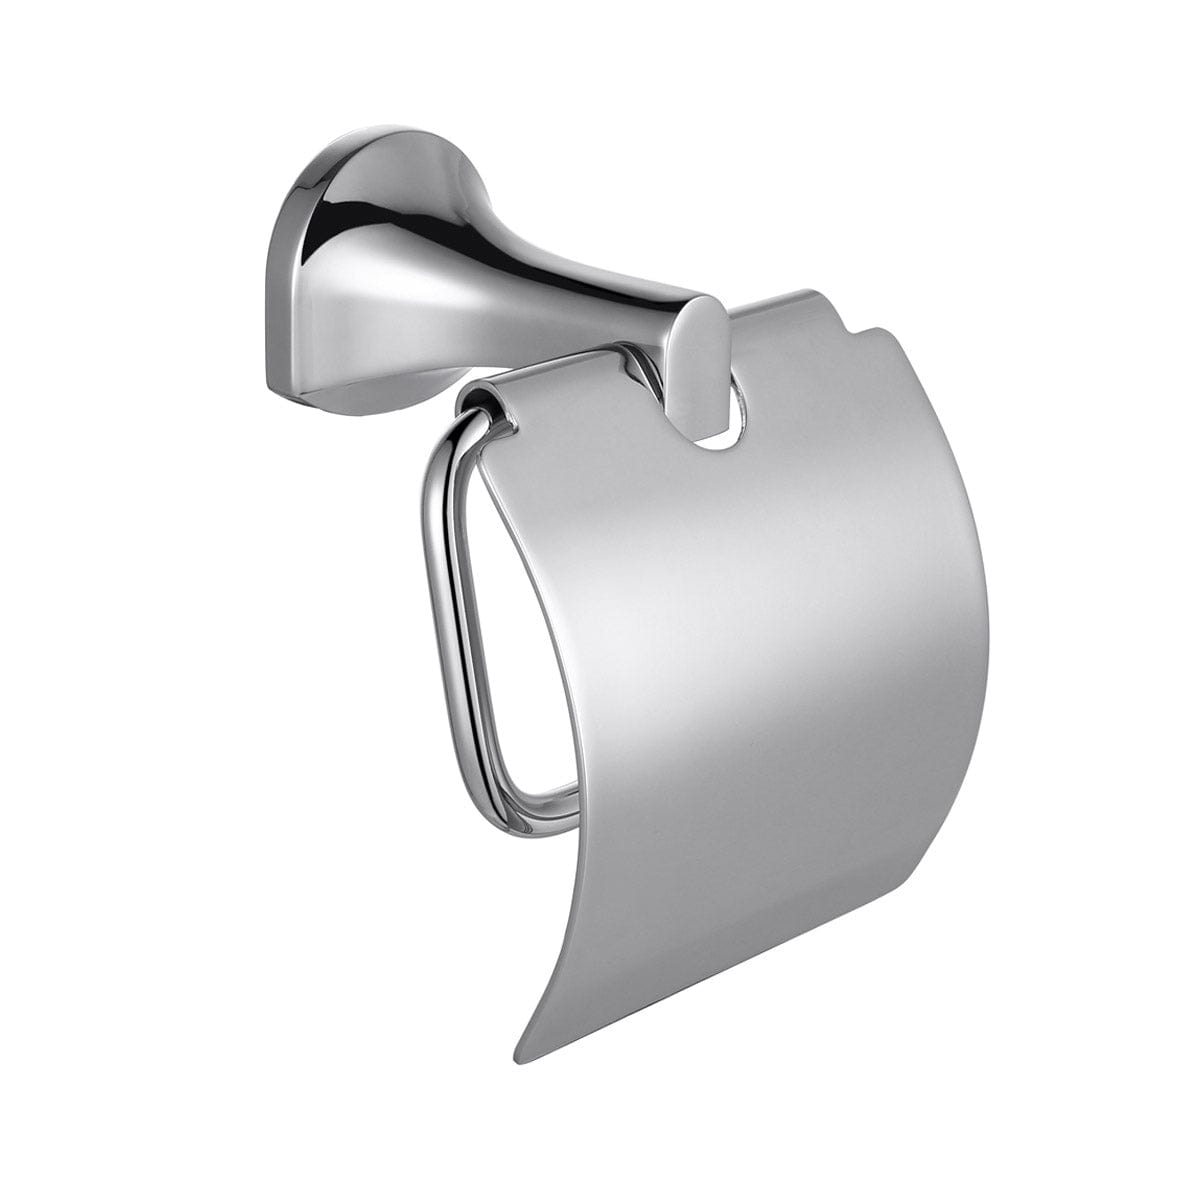 Shop Bathroom Stainless Steel Toilet Paper Holder - 9351 | Buy at Supply Master Accra, Ghana Bathroom Accessories Buy Tools hardware Building materials